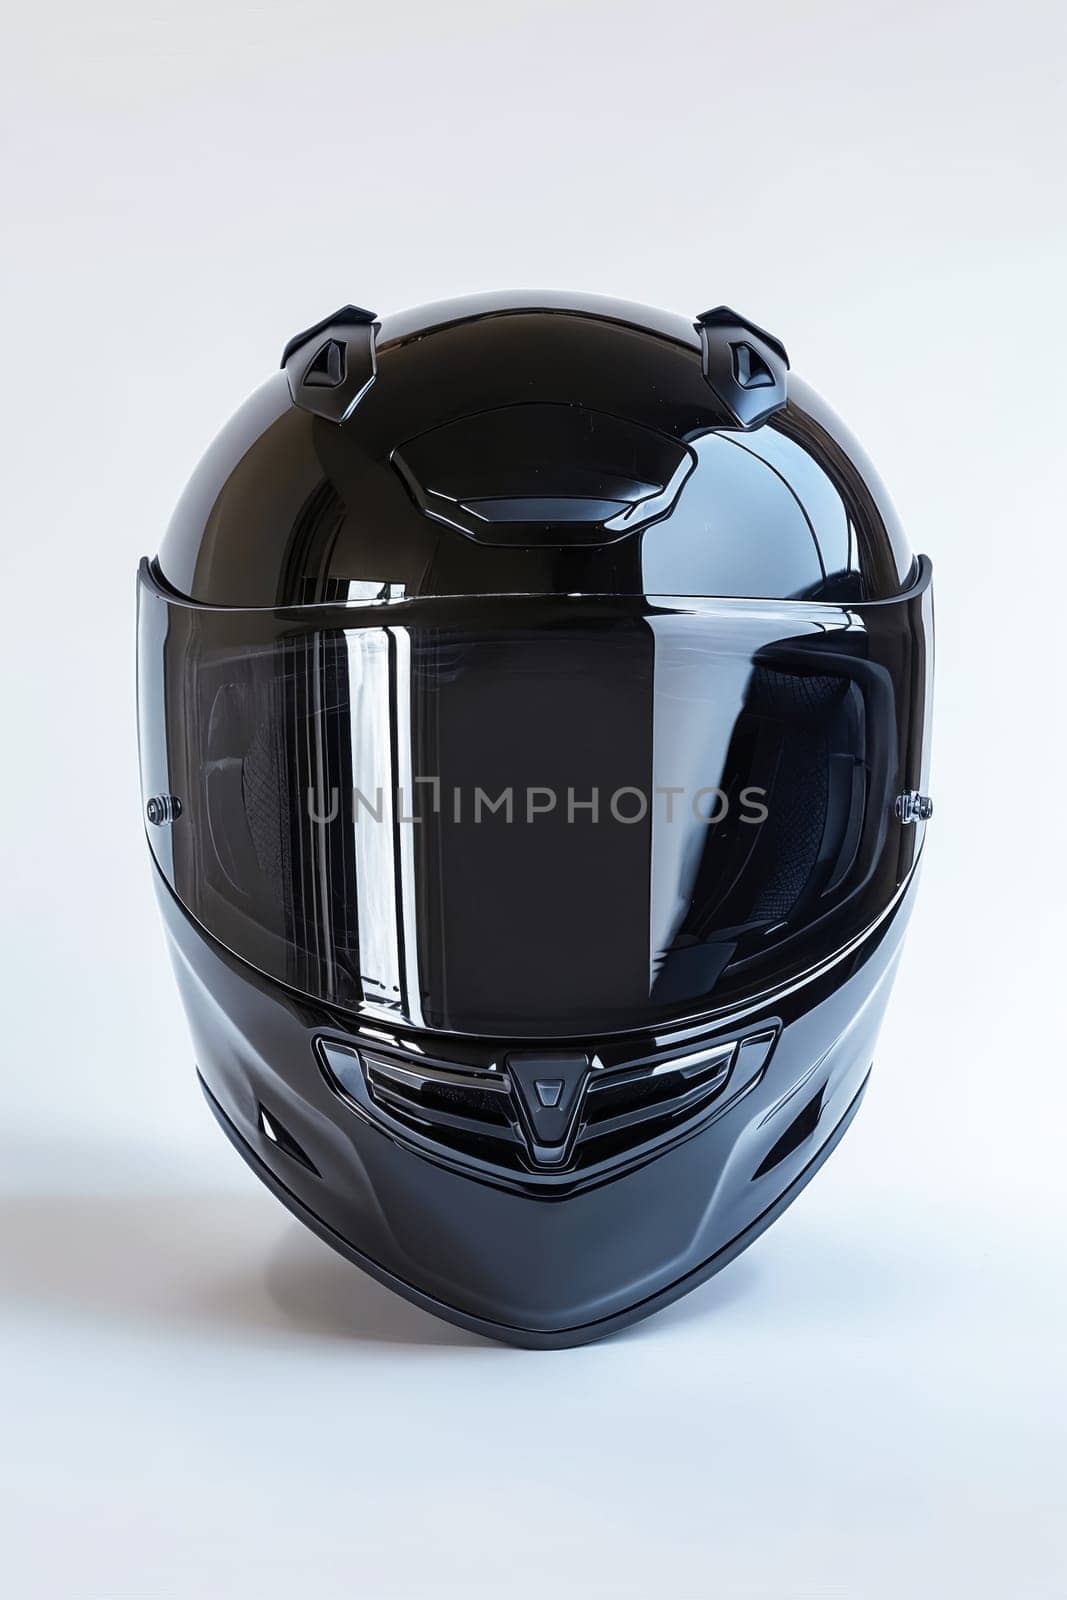 A black motorcycle helmet is sitting on a white background. The helmet is shiny and reflective, giving it a sleek and modern appearance. Generative AI